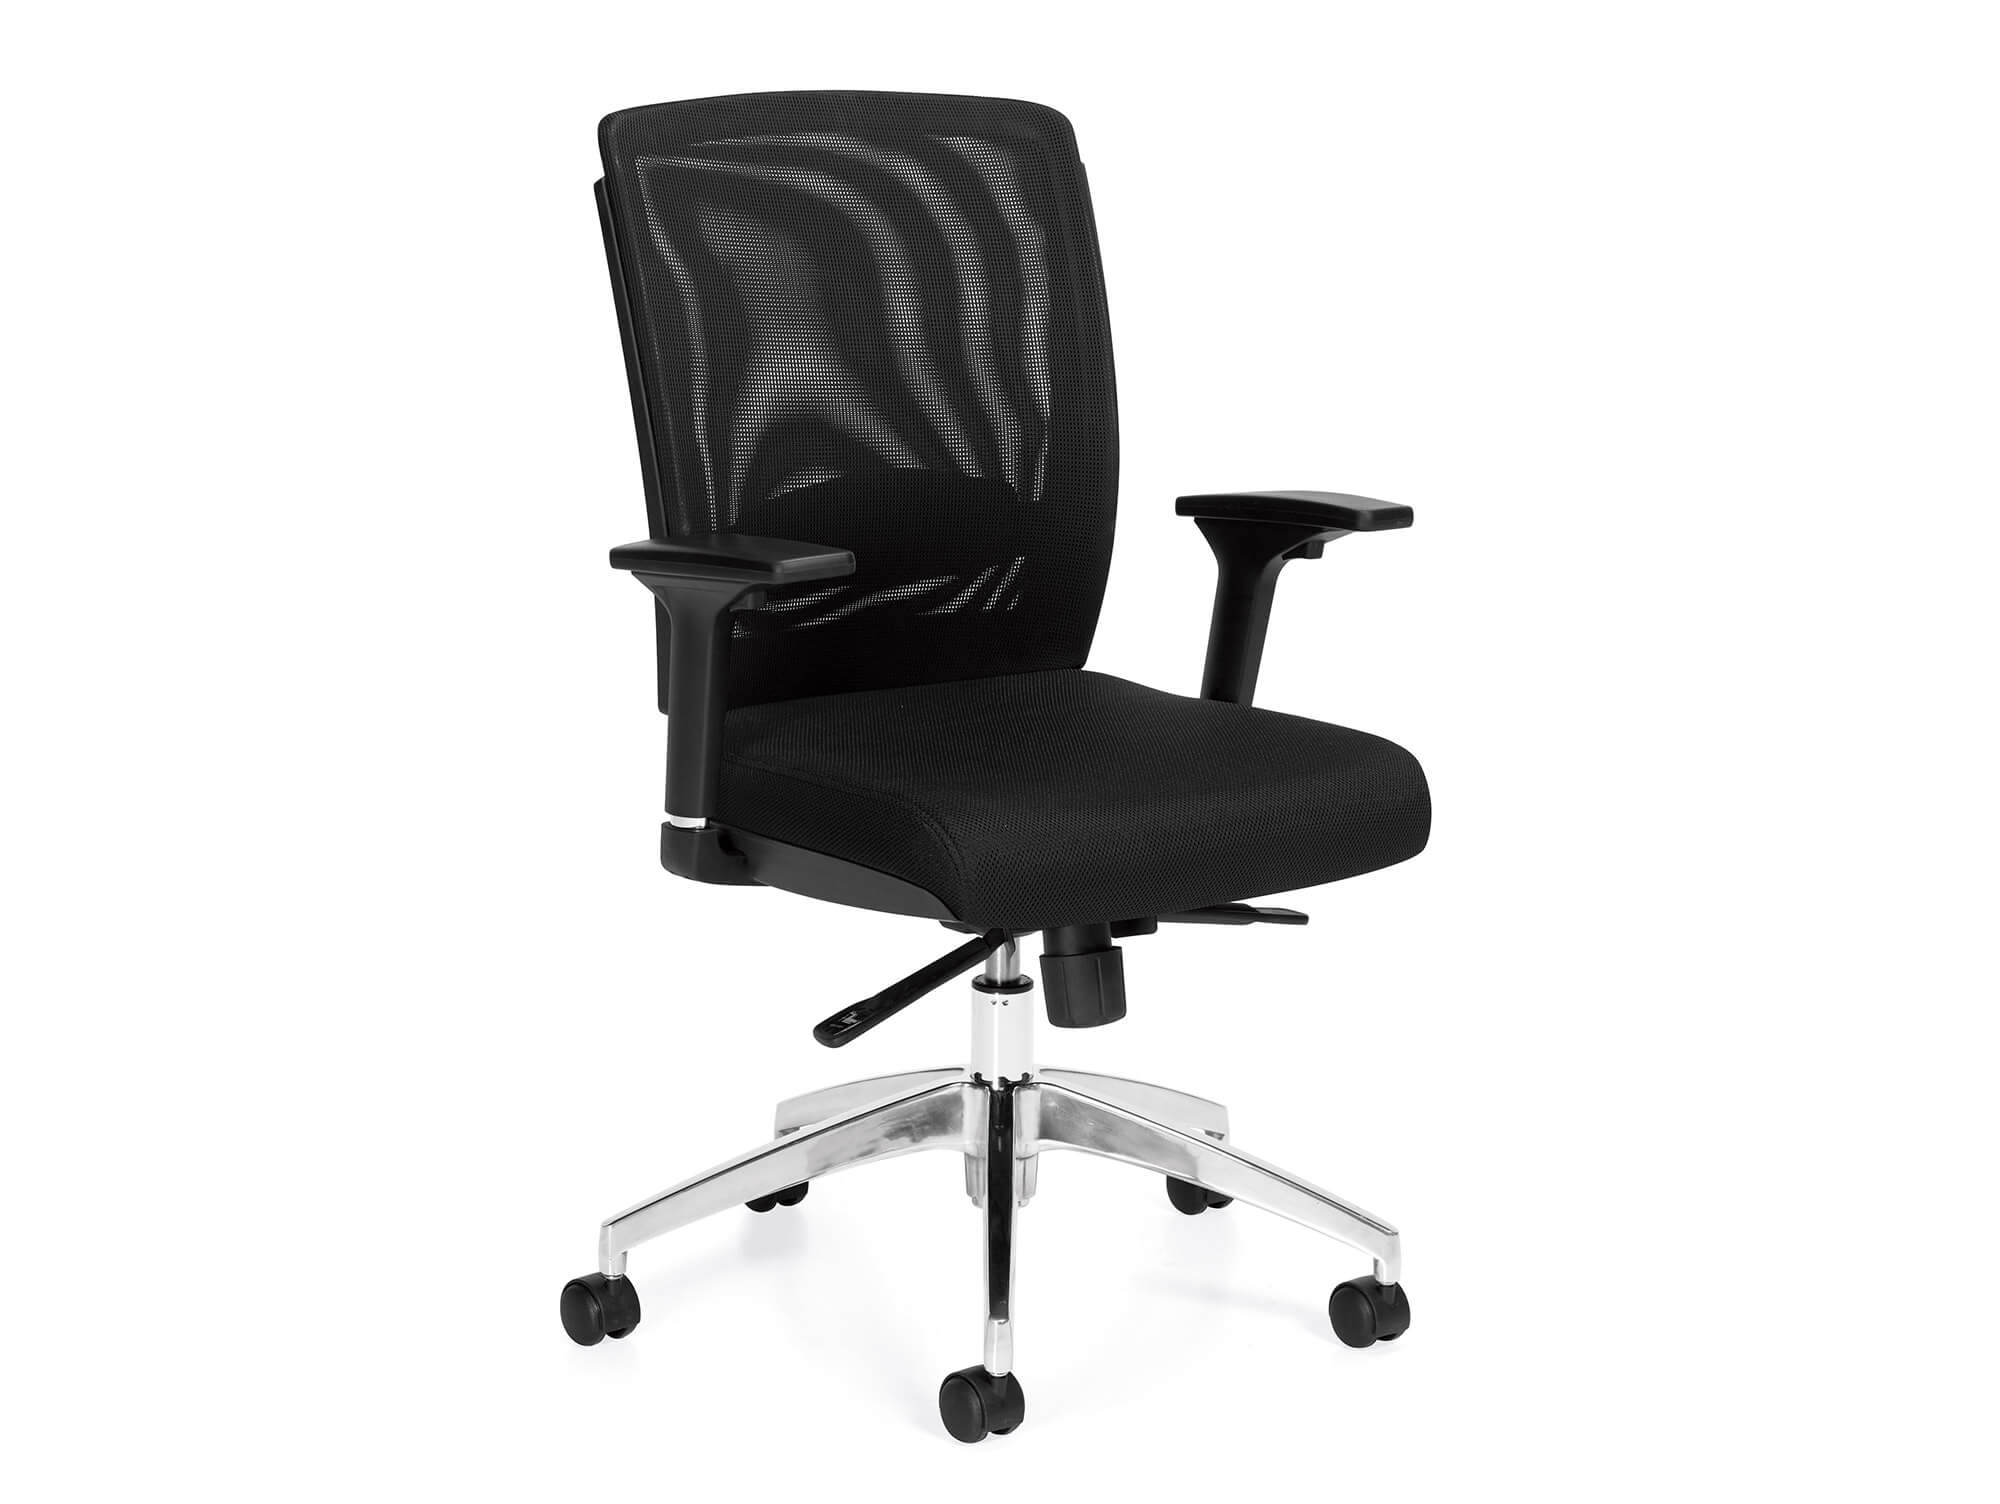 chairs-for-office-workstation-chair.jpg